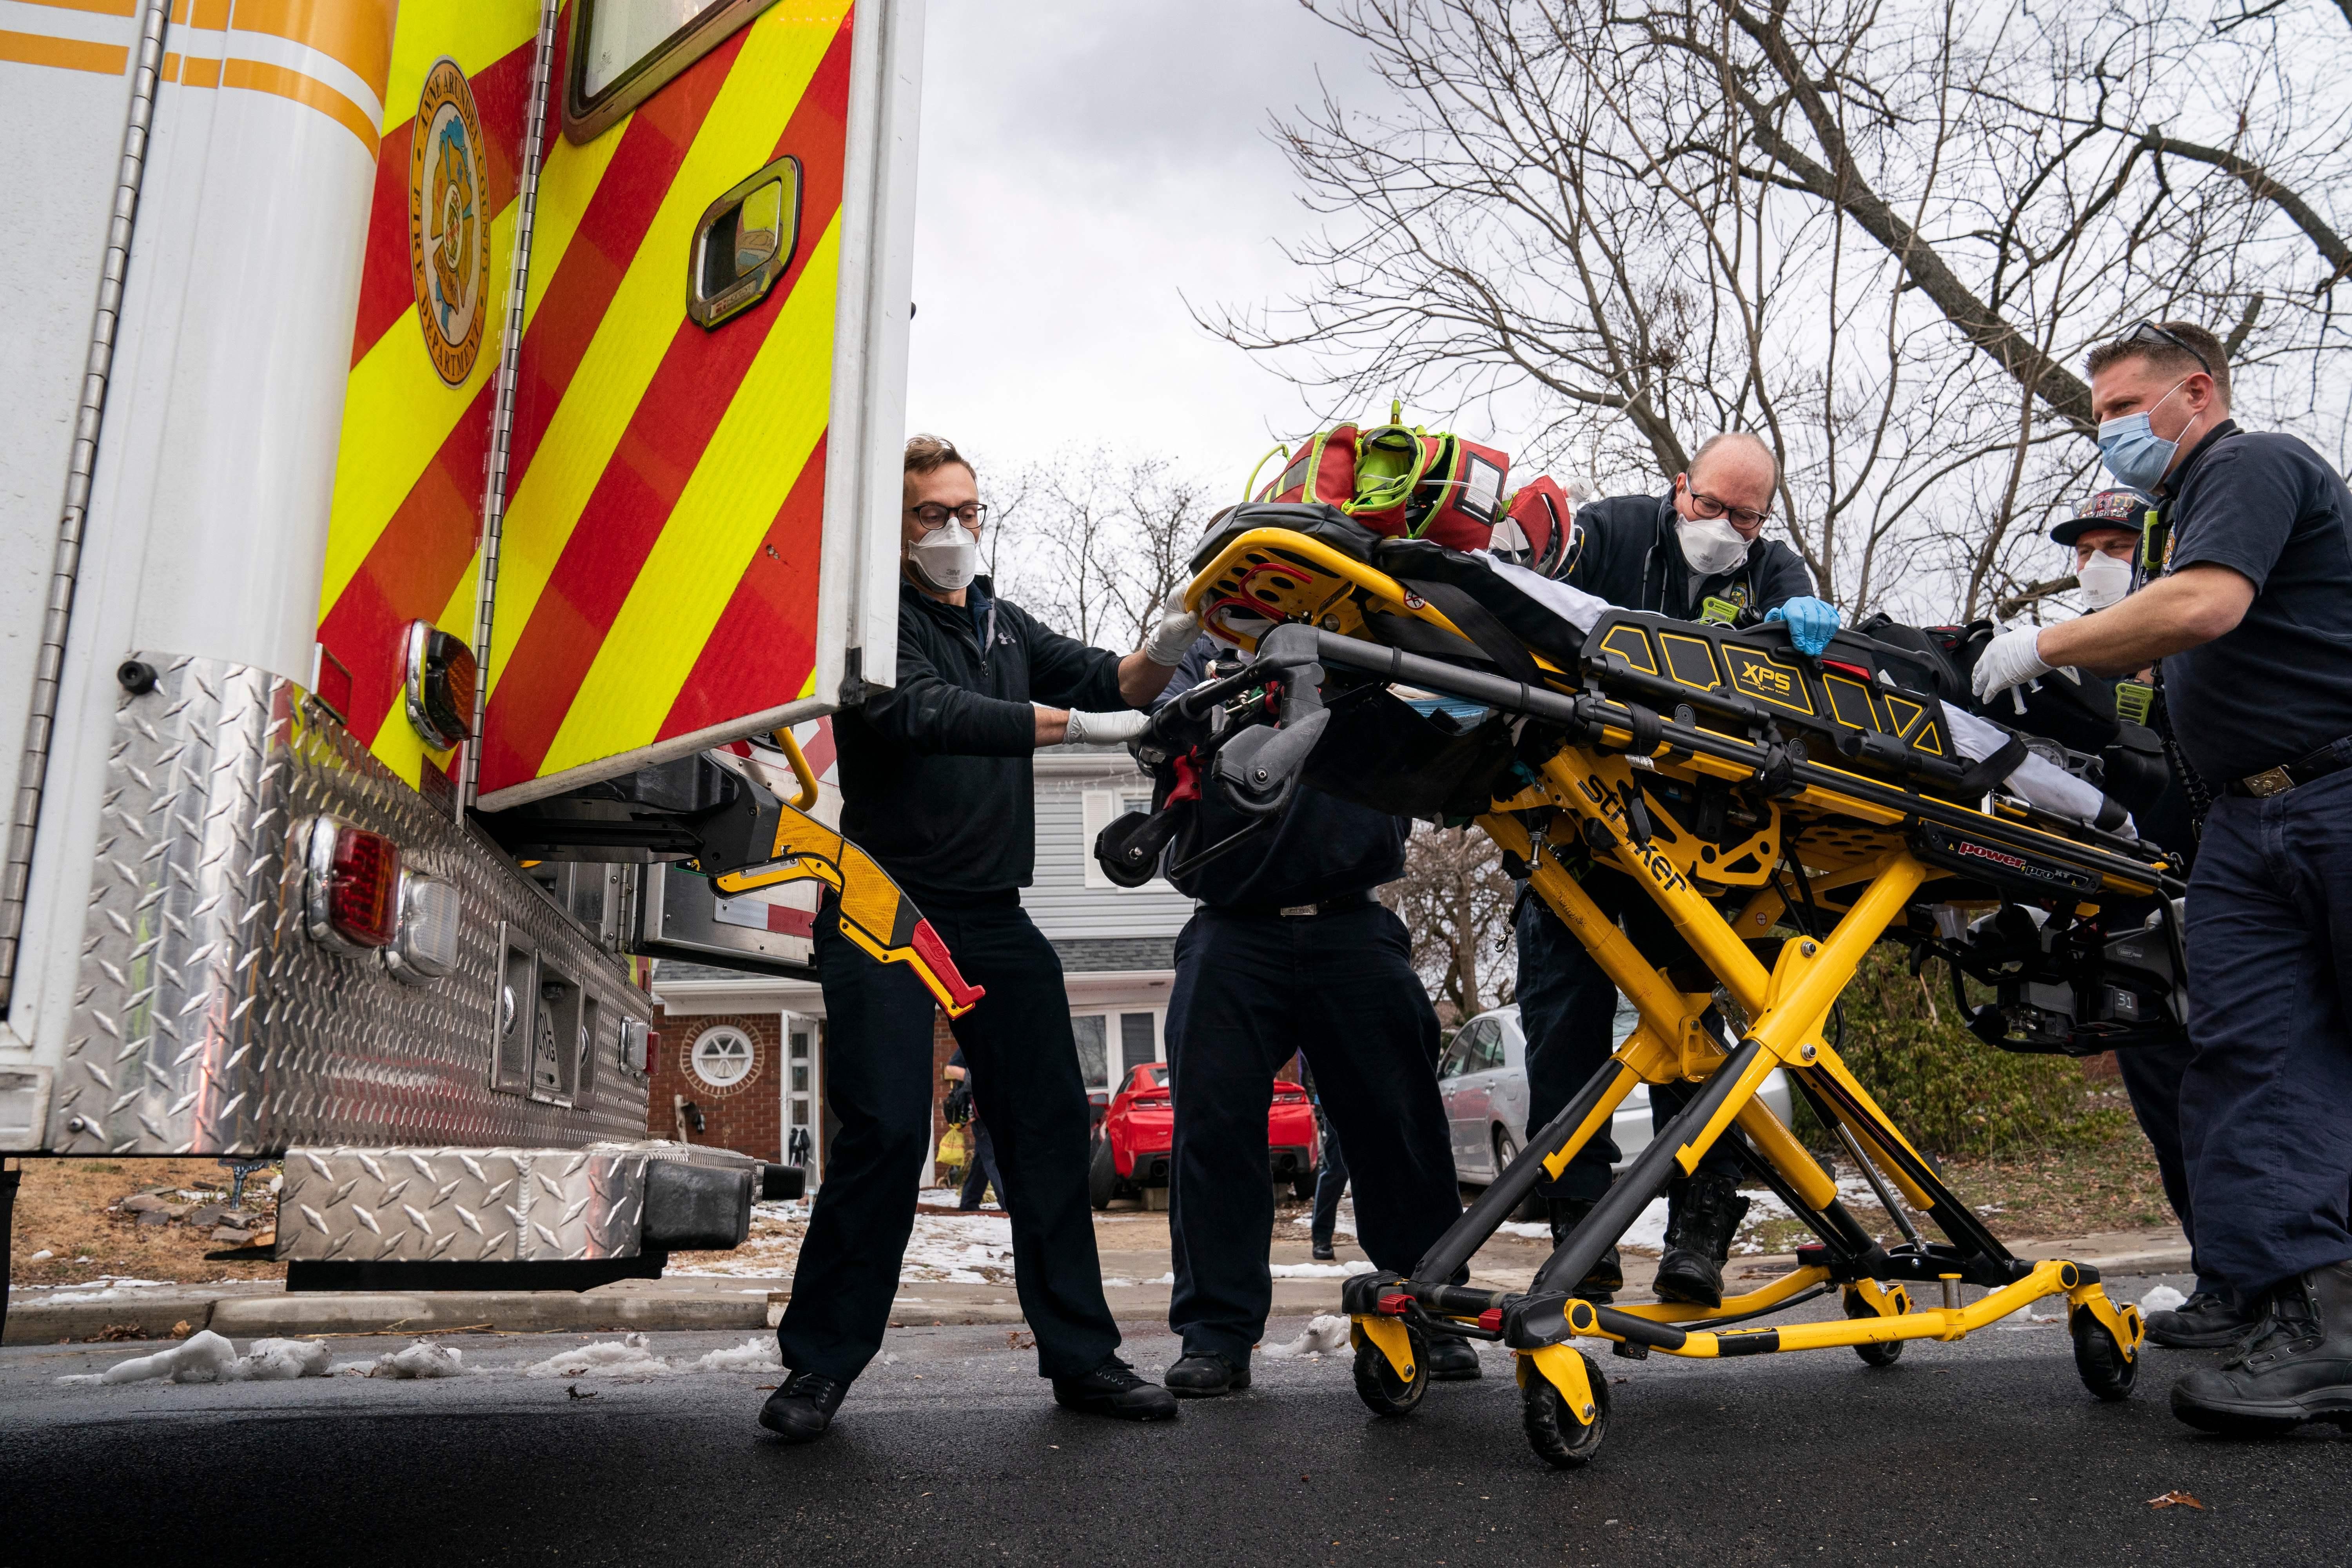 Firefighters and paramedics with Anne Arundel County Fire Department load a pediatric Covid-19 patient who is in cardiac arrest into an ambulance after responding to a 911 emergency call on January 17, 2022, in Glen Burnie, Maryland. 